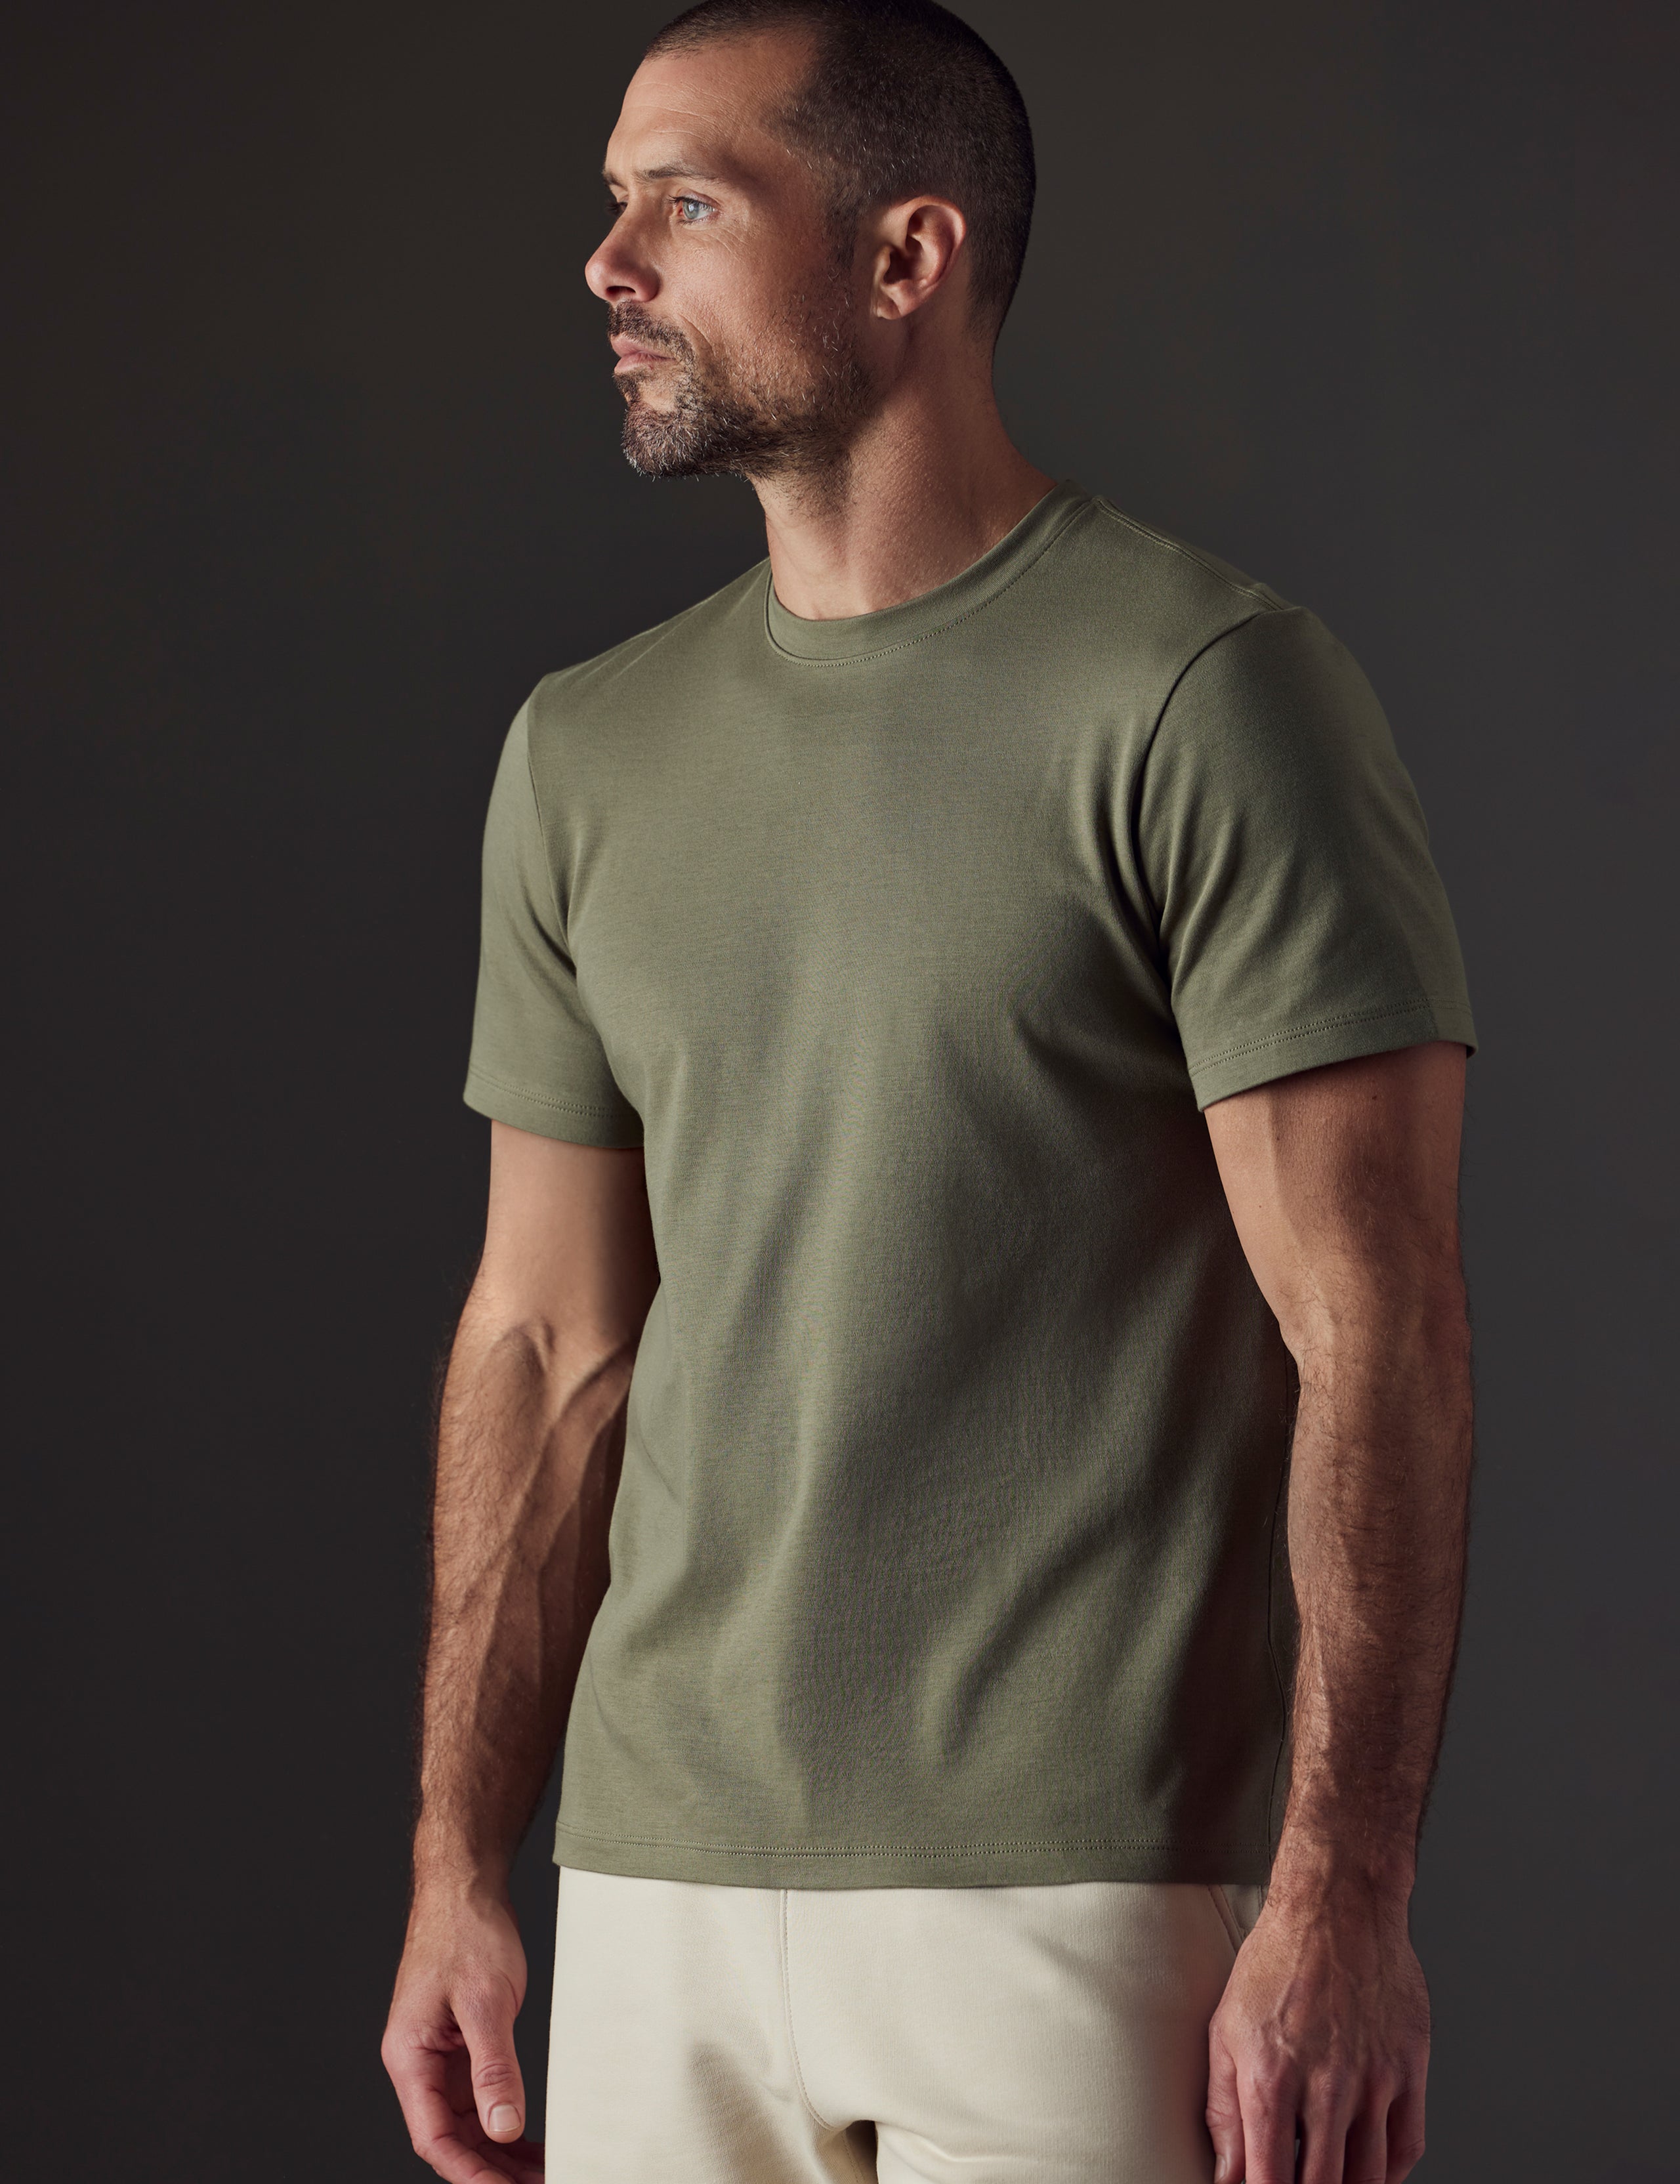 Man wearing green organic cotton tee from AETHER Apparel